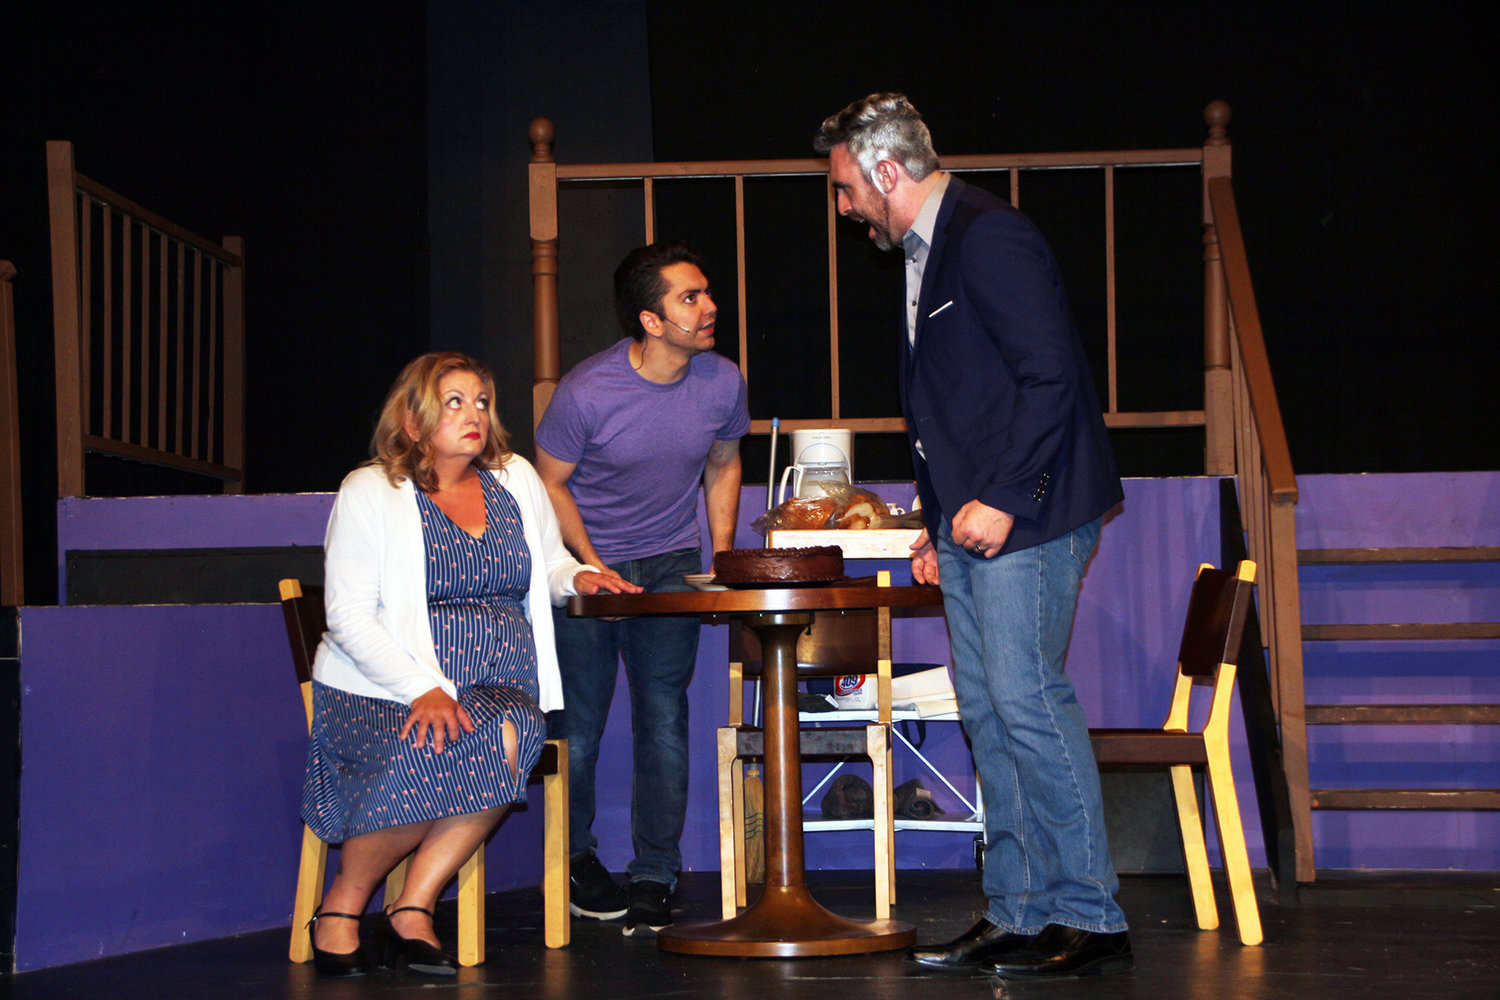 Members of the cast of ‘Next to Normal,’ from left Jessica Sargent-Wilk, Chris Toia and Shane Archer Reed, perform a scene. The musical, received wide acclaim upon its release in 2009, and the local production is also garnering high praise for its ambition and execution.